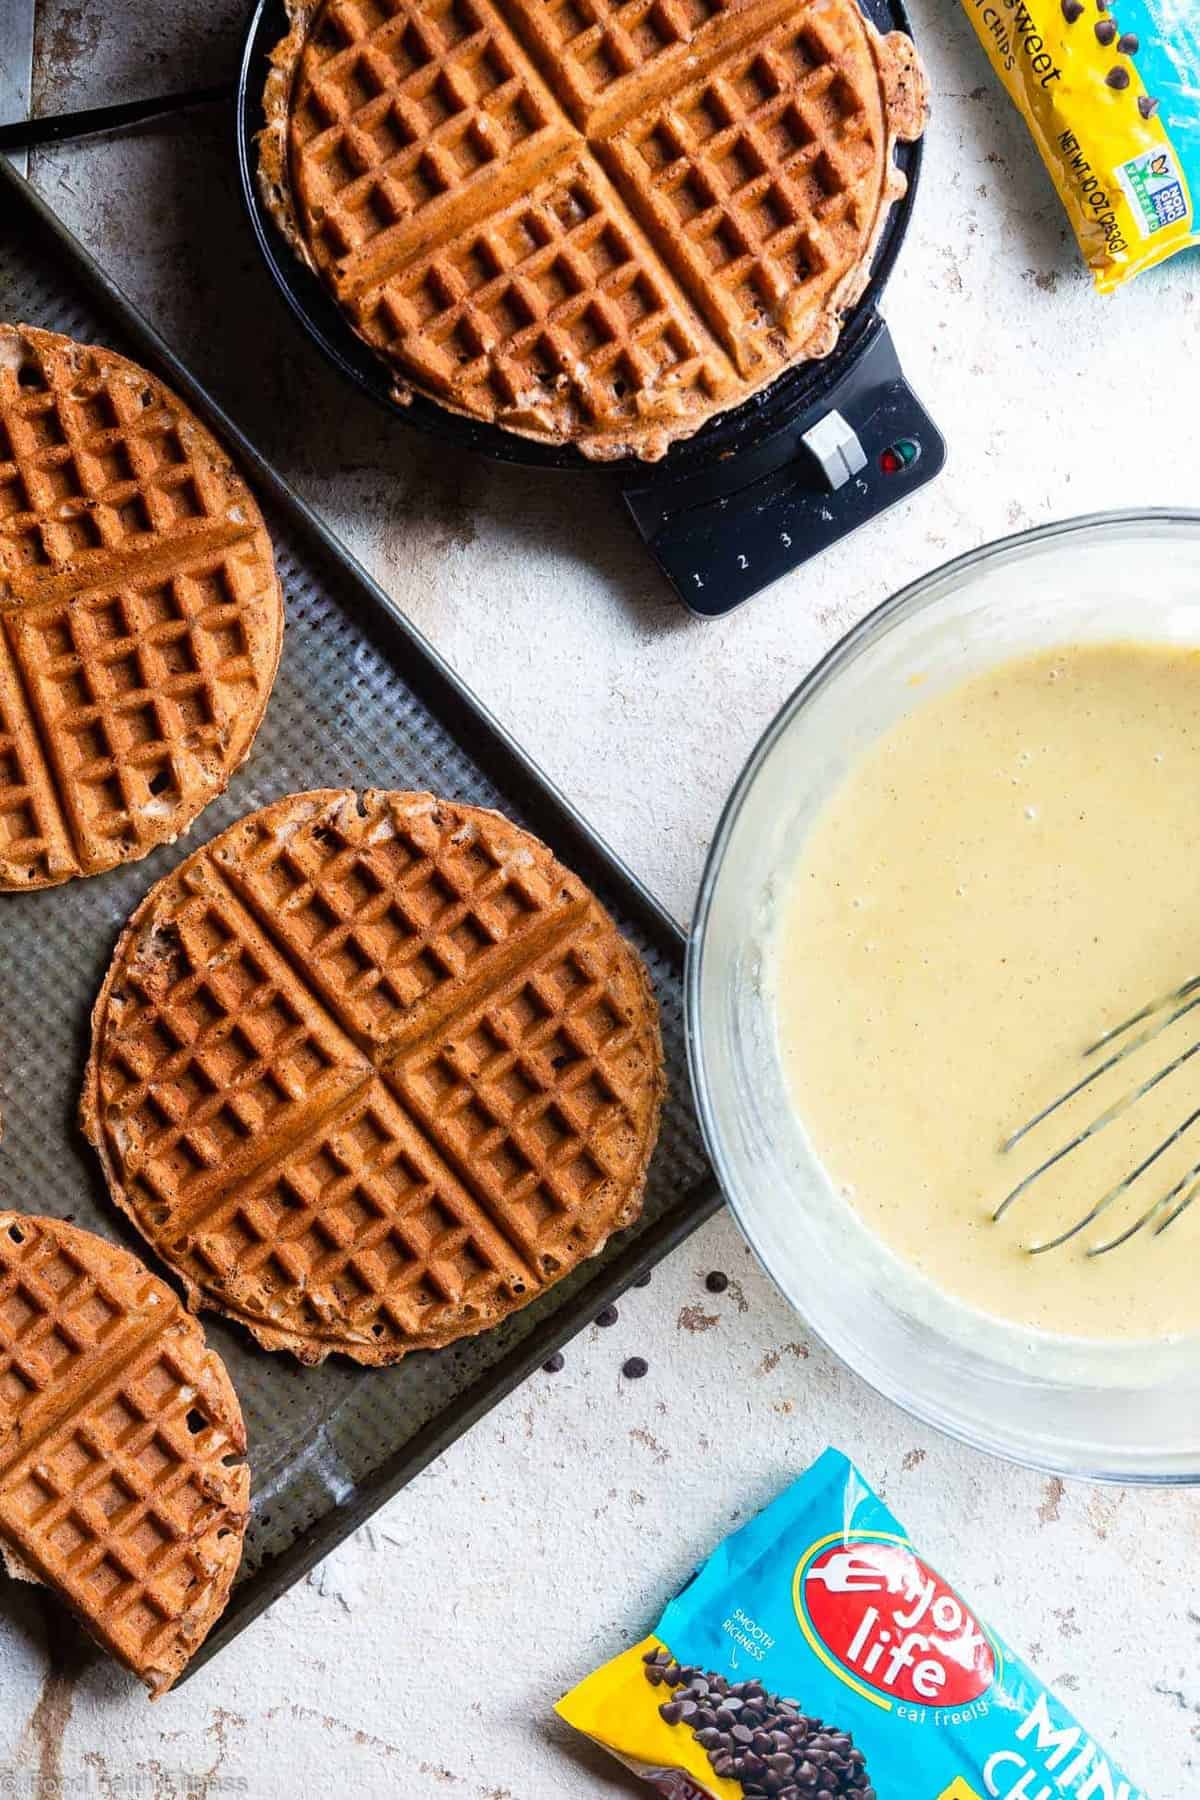 Gluten Free Easy Vegan Waffles with Eggnog "Cream" Sauce - These FLUFFY vegan waffles are studded with chocolate chips and covered with a healthy eggnog "cream" sauce! A delicious holiday breakfast that you can make ahead for easy mornings! | #Foodfaithfitness | 